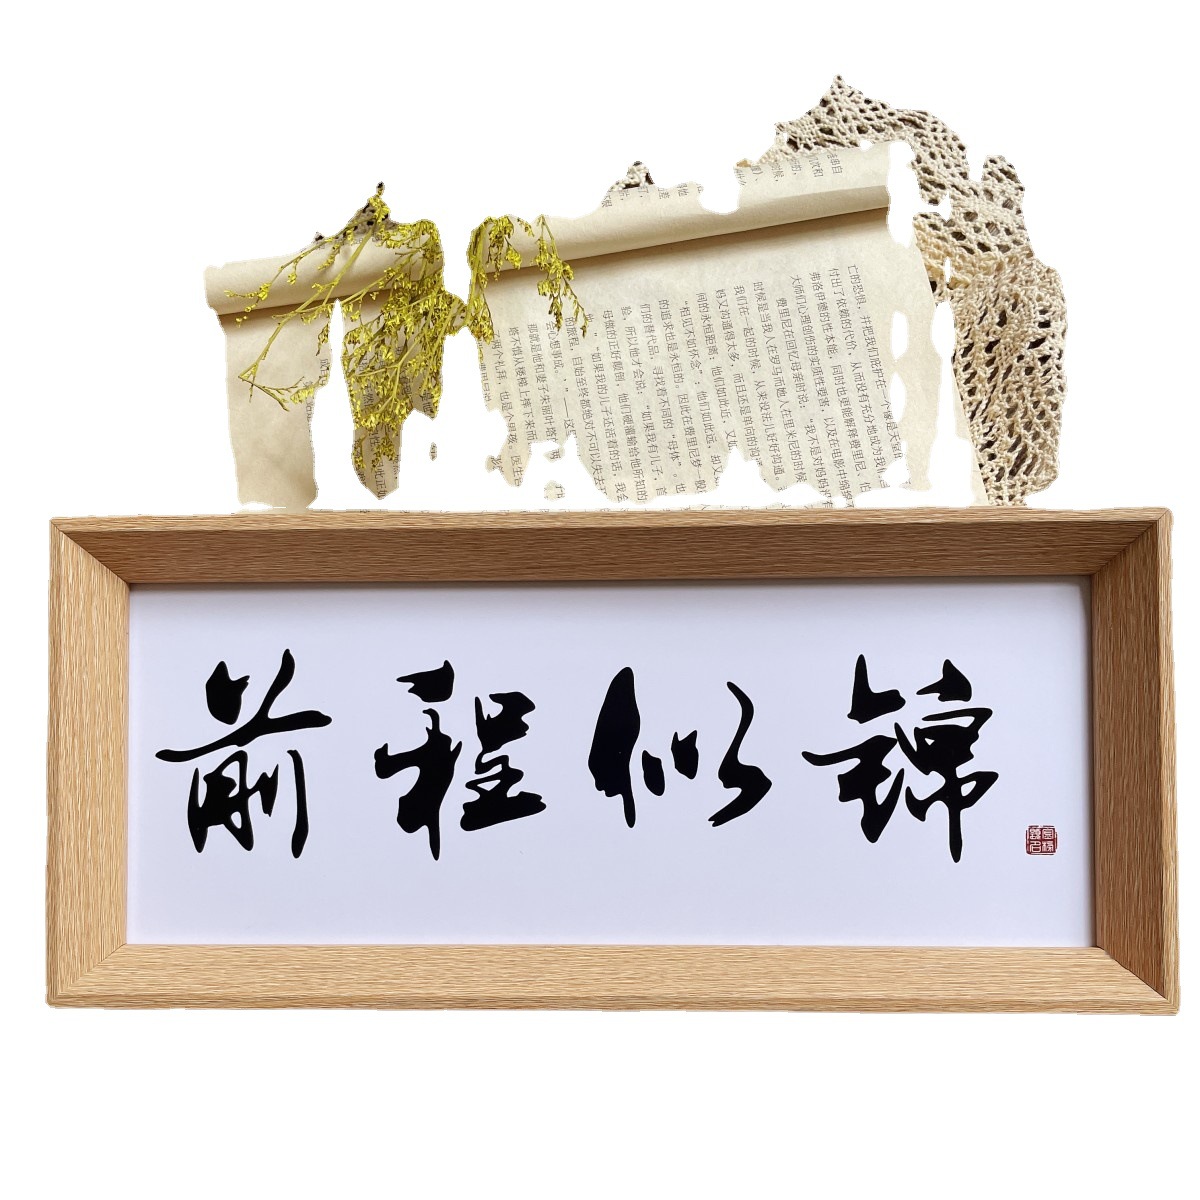 Wooden Inspirational Calligraphy Works Frame New Chinese Calligraphy Painting Mounting Table-Top Picture Frame Vintage Photo Frame Display